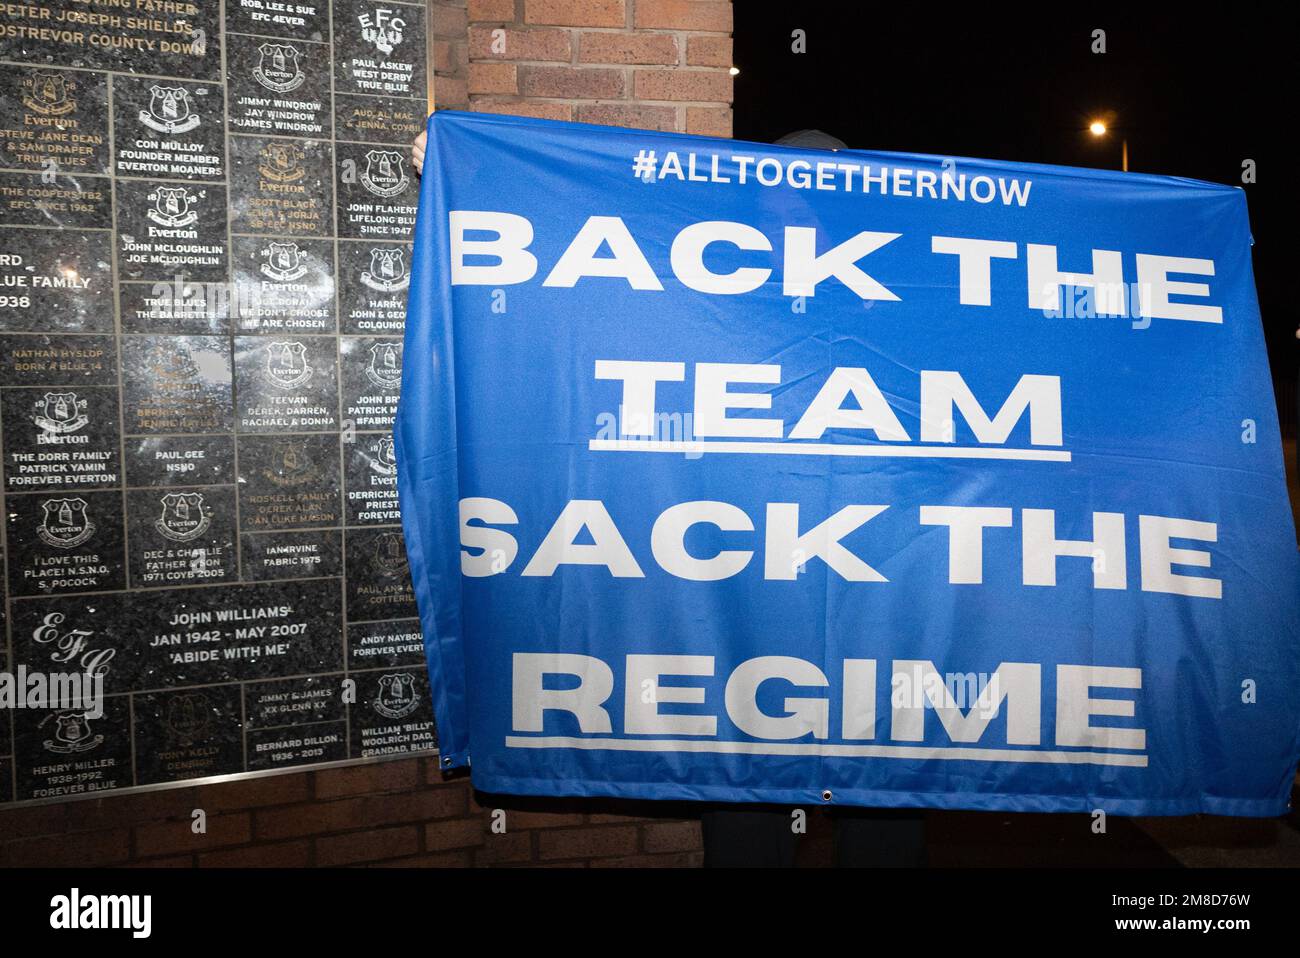 Everton fan’s show flag saying “Back The Team Sack The Regime” protesting during the Everton fan’s protest at Goodison Park, Liverpool, United Kingdom, 13th January 2023  (Photo by Phil Bryan/Alamy Live News) Stock Photo